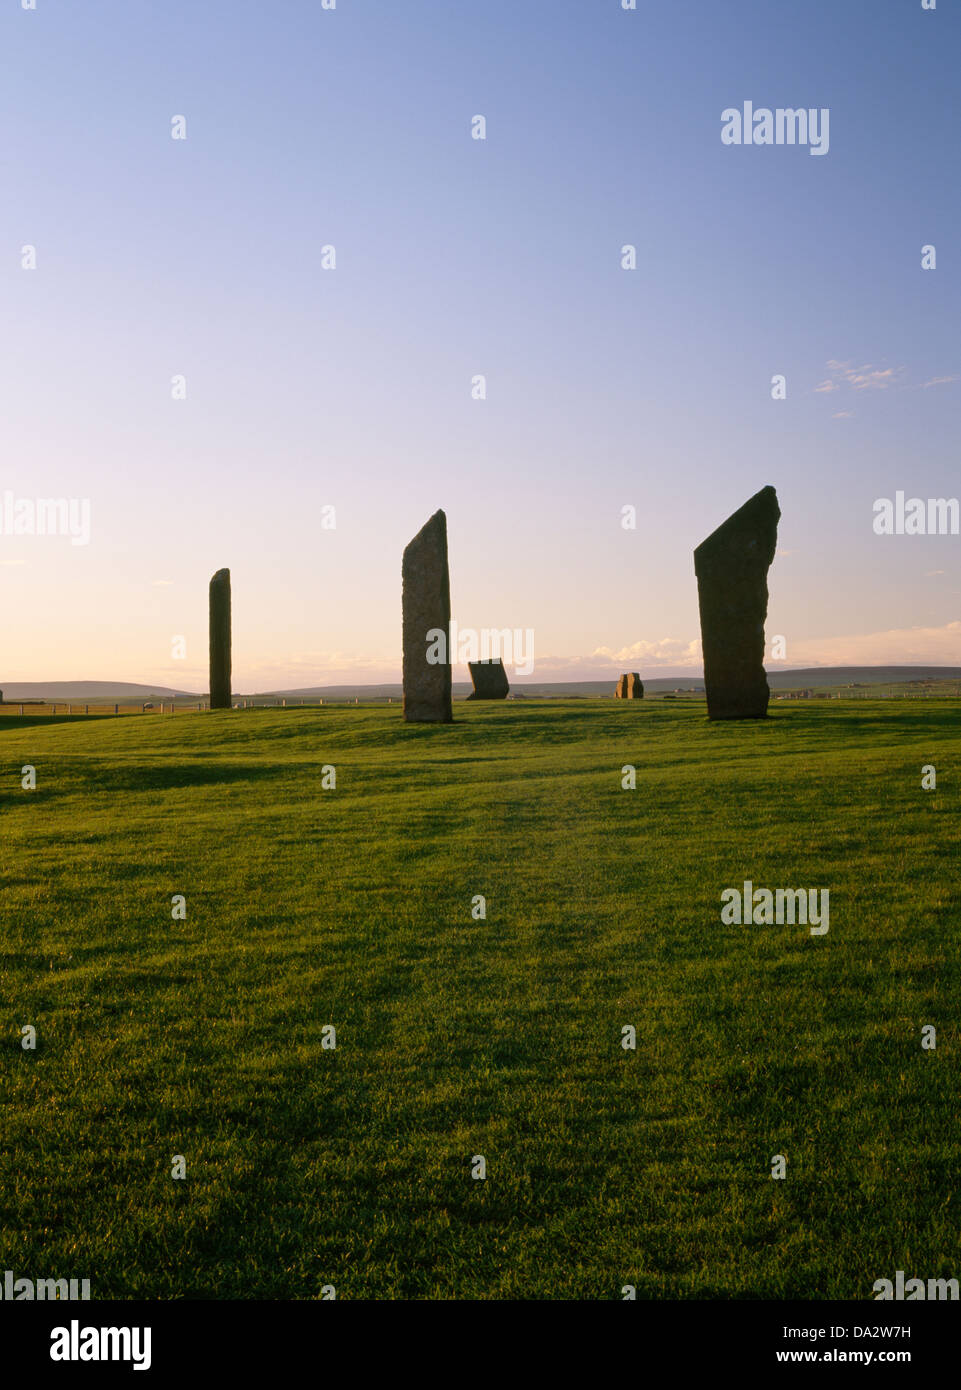 The Stones of Stenness stone circle, Mainland, Orkney, standing within the remains of a circular earthwork henge monument shown up by evening sunshine Stock Photo